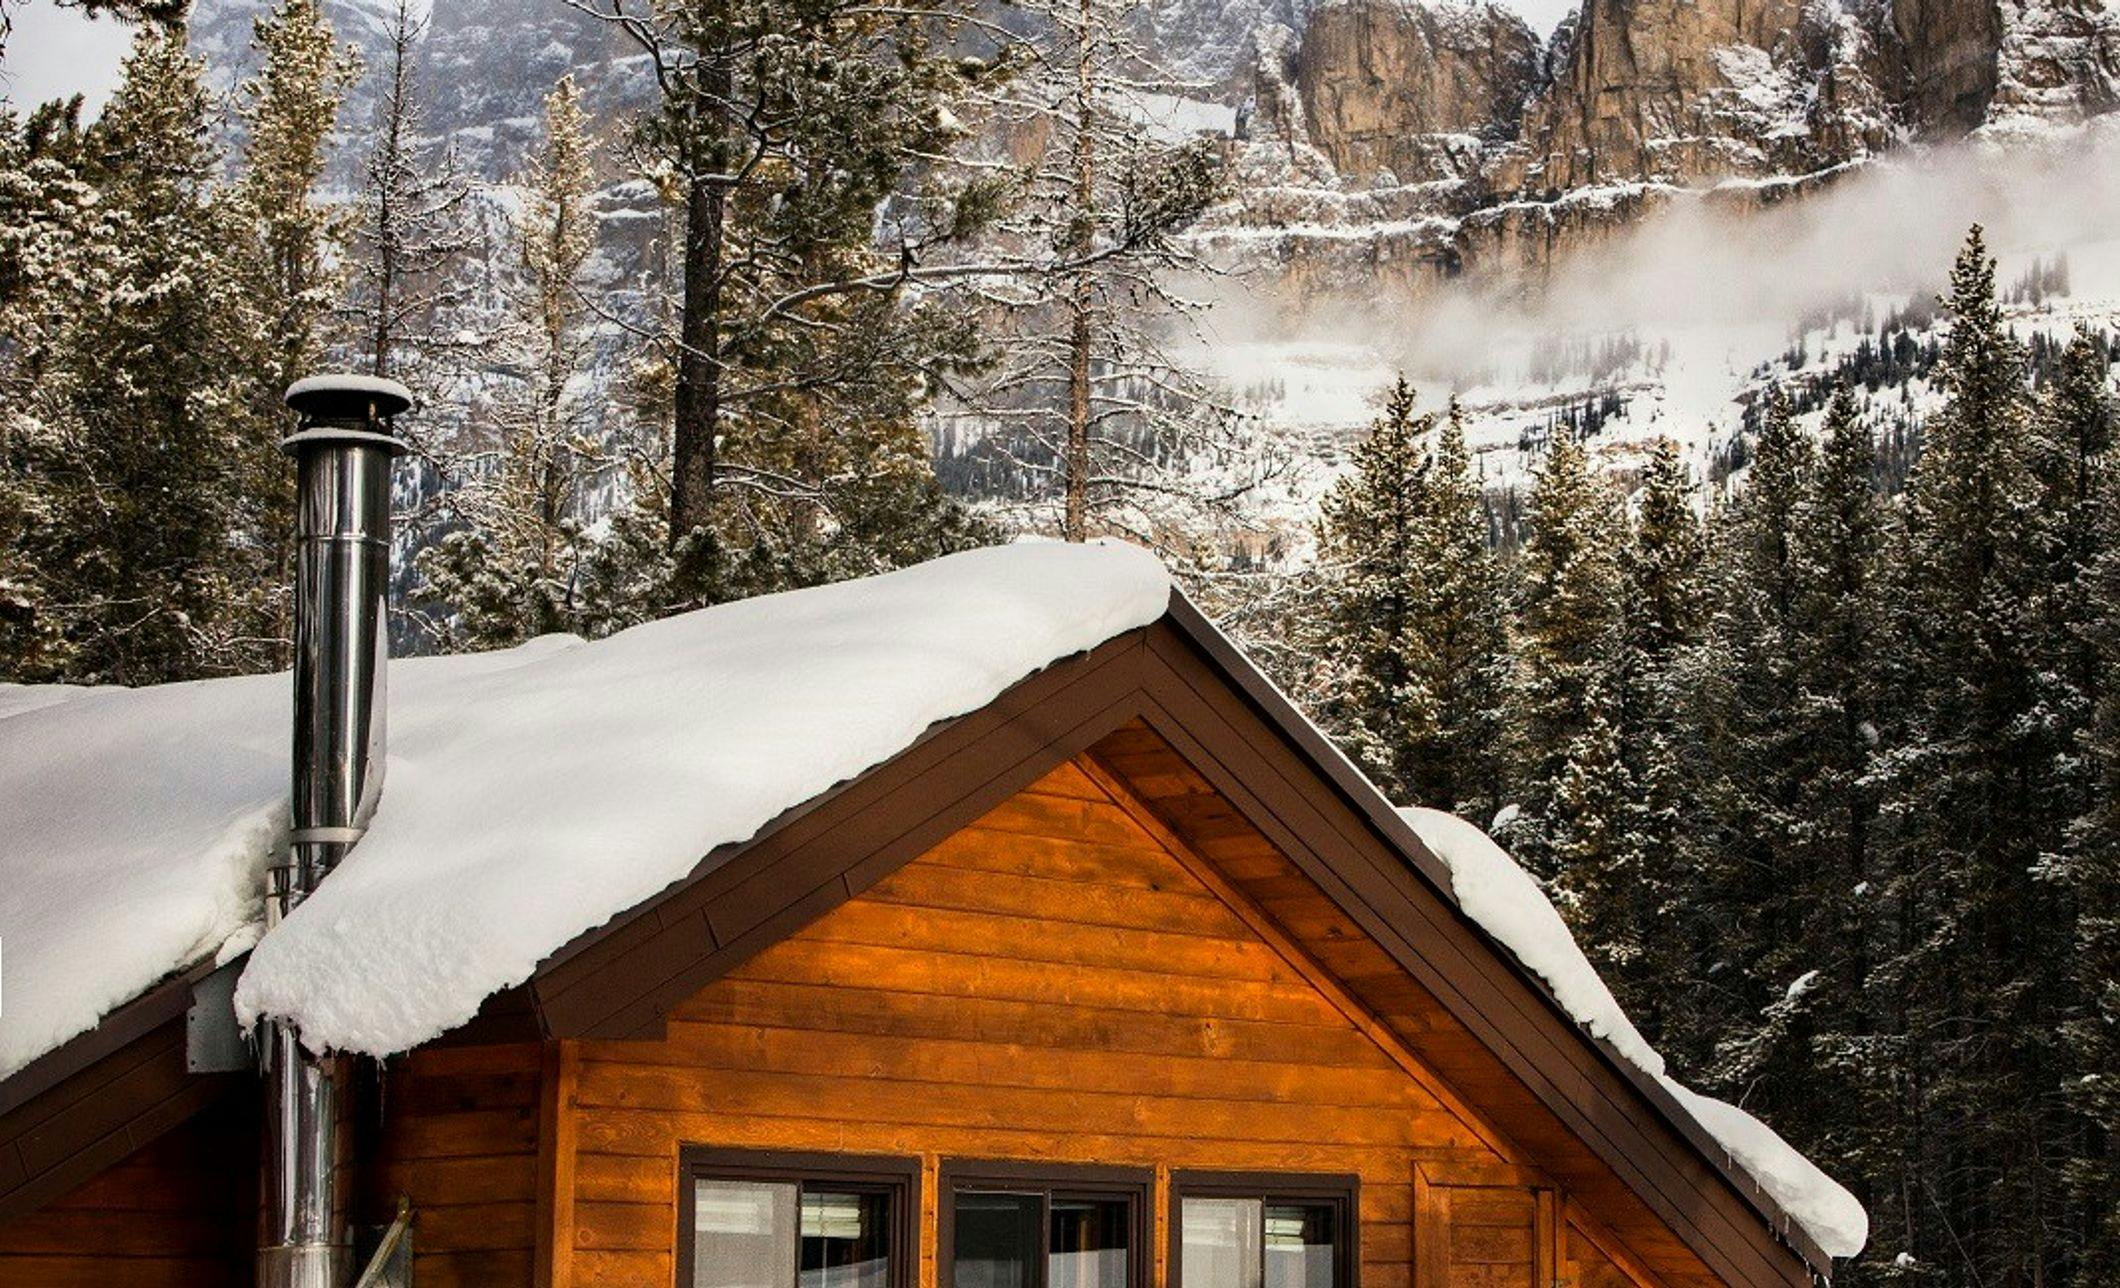 A snow-covered wooden chalet with towering mountains in the background